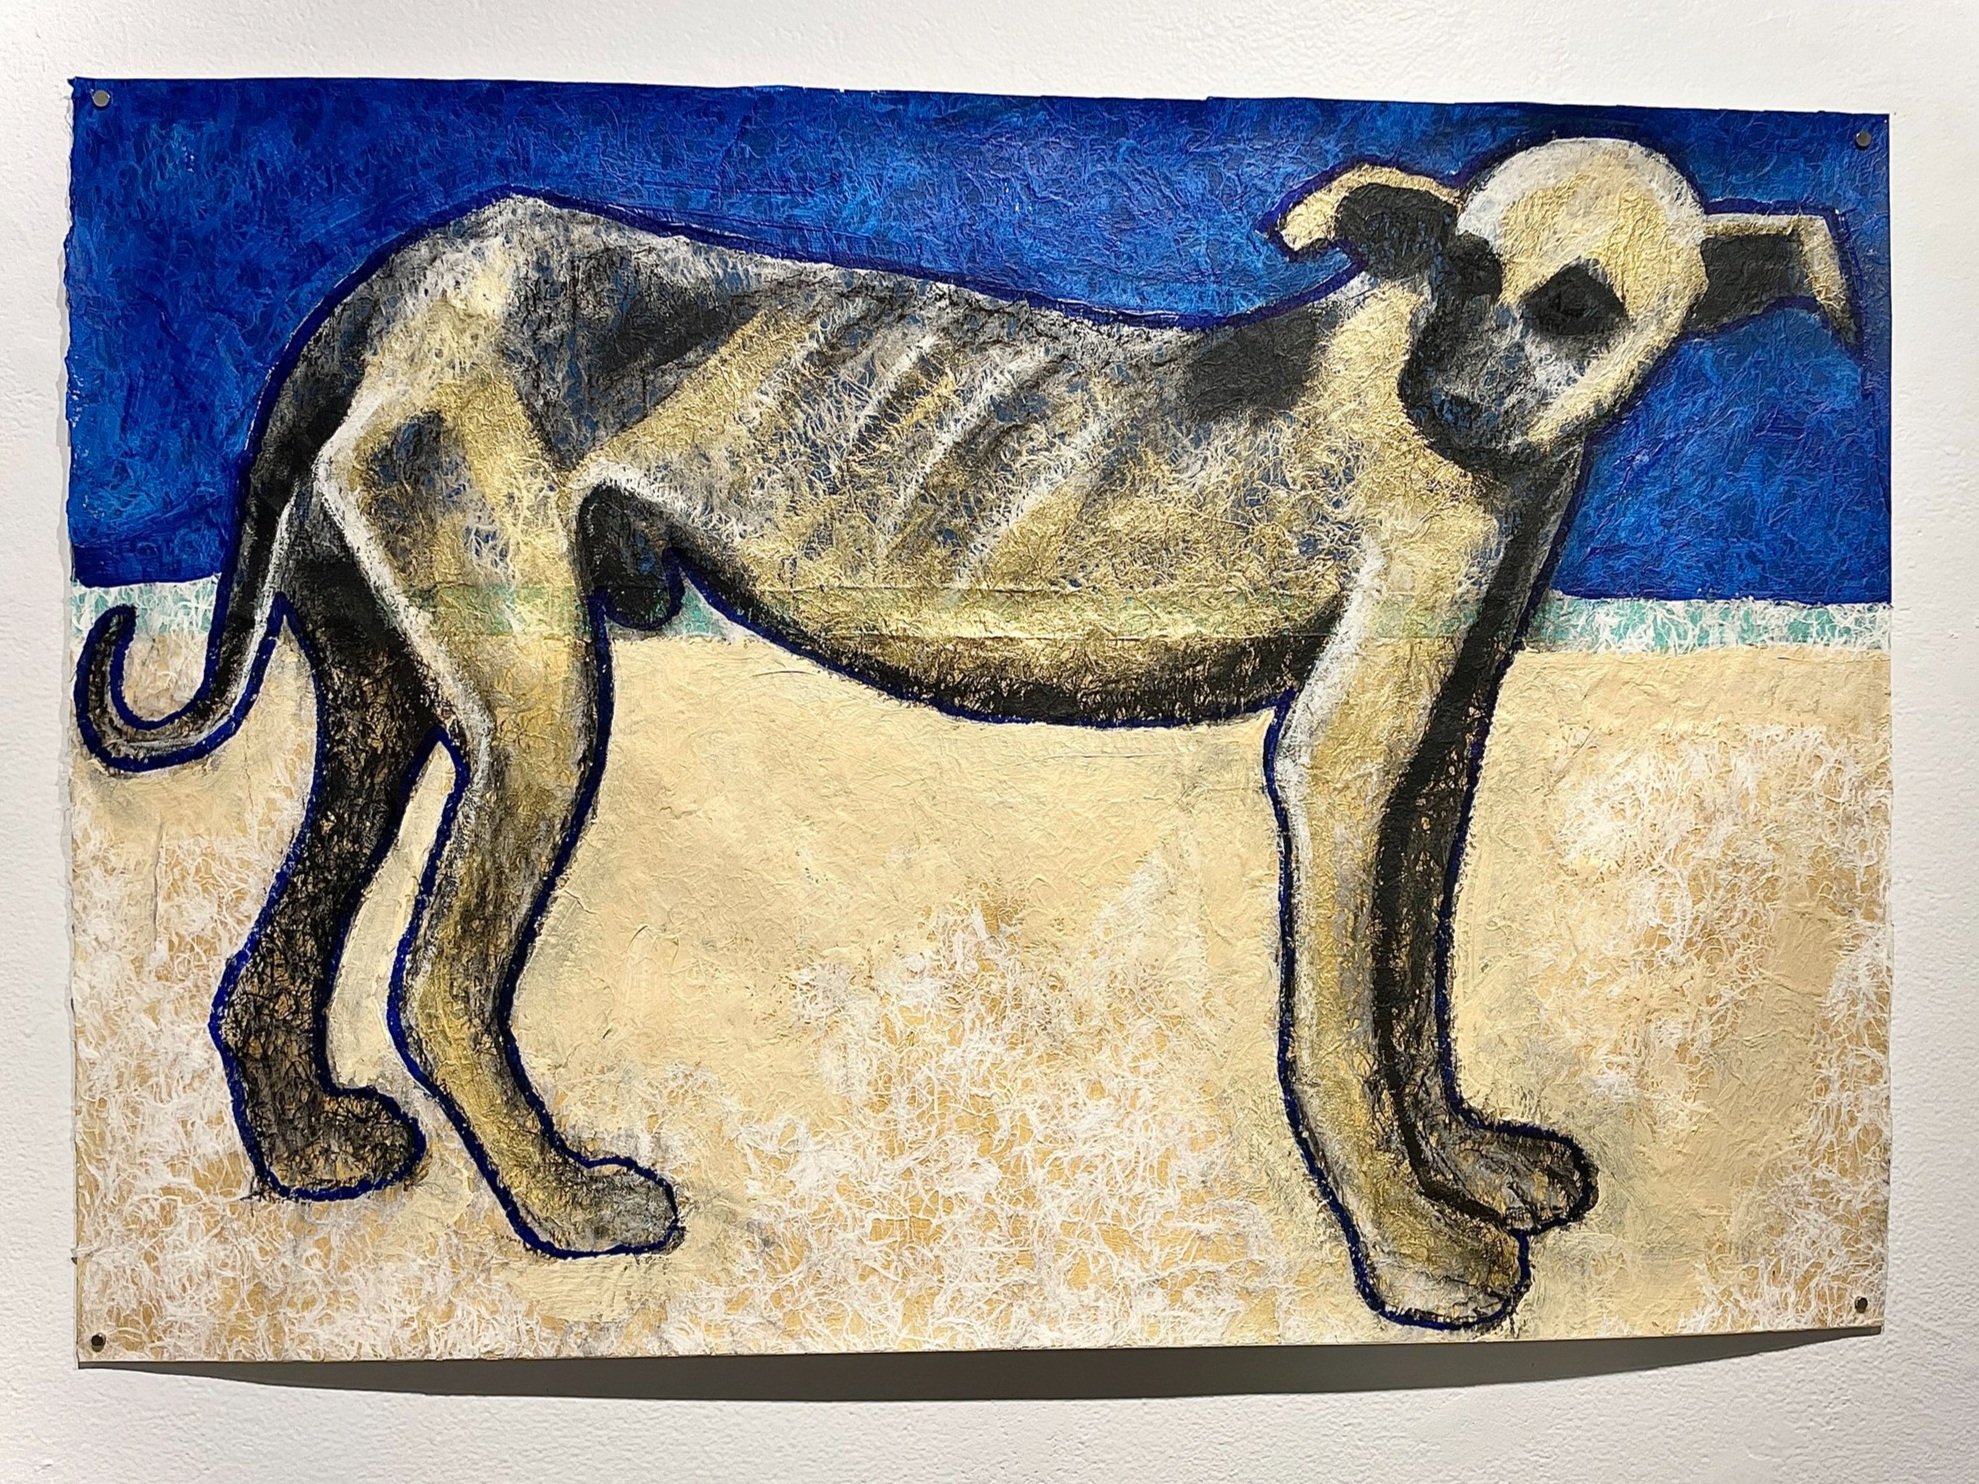  The Nicaraguan Dog  John Kotula&nbsp;  Acrylic and mixed medium on paper  $350&nbsp;     I have thought of myself as an artist since third grade when my classmates started asking me to draw things for them.&nbsp; For awhile, maybe it was only a week